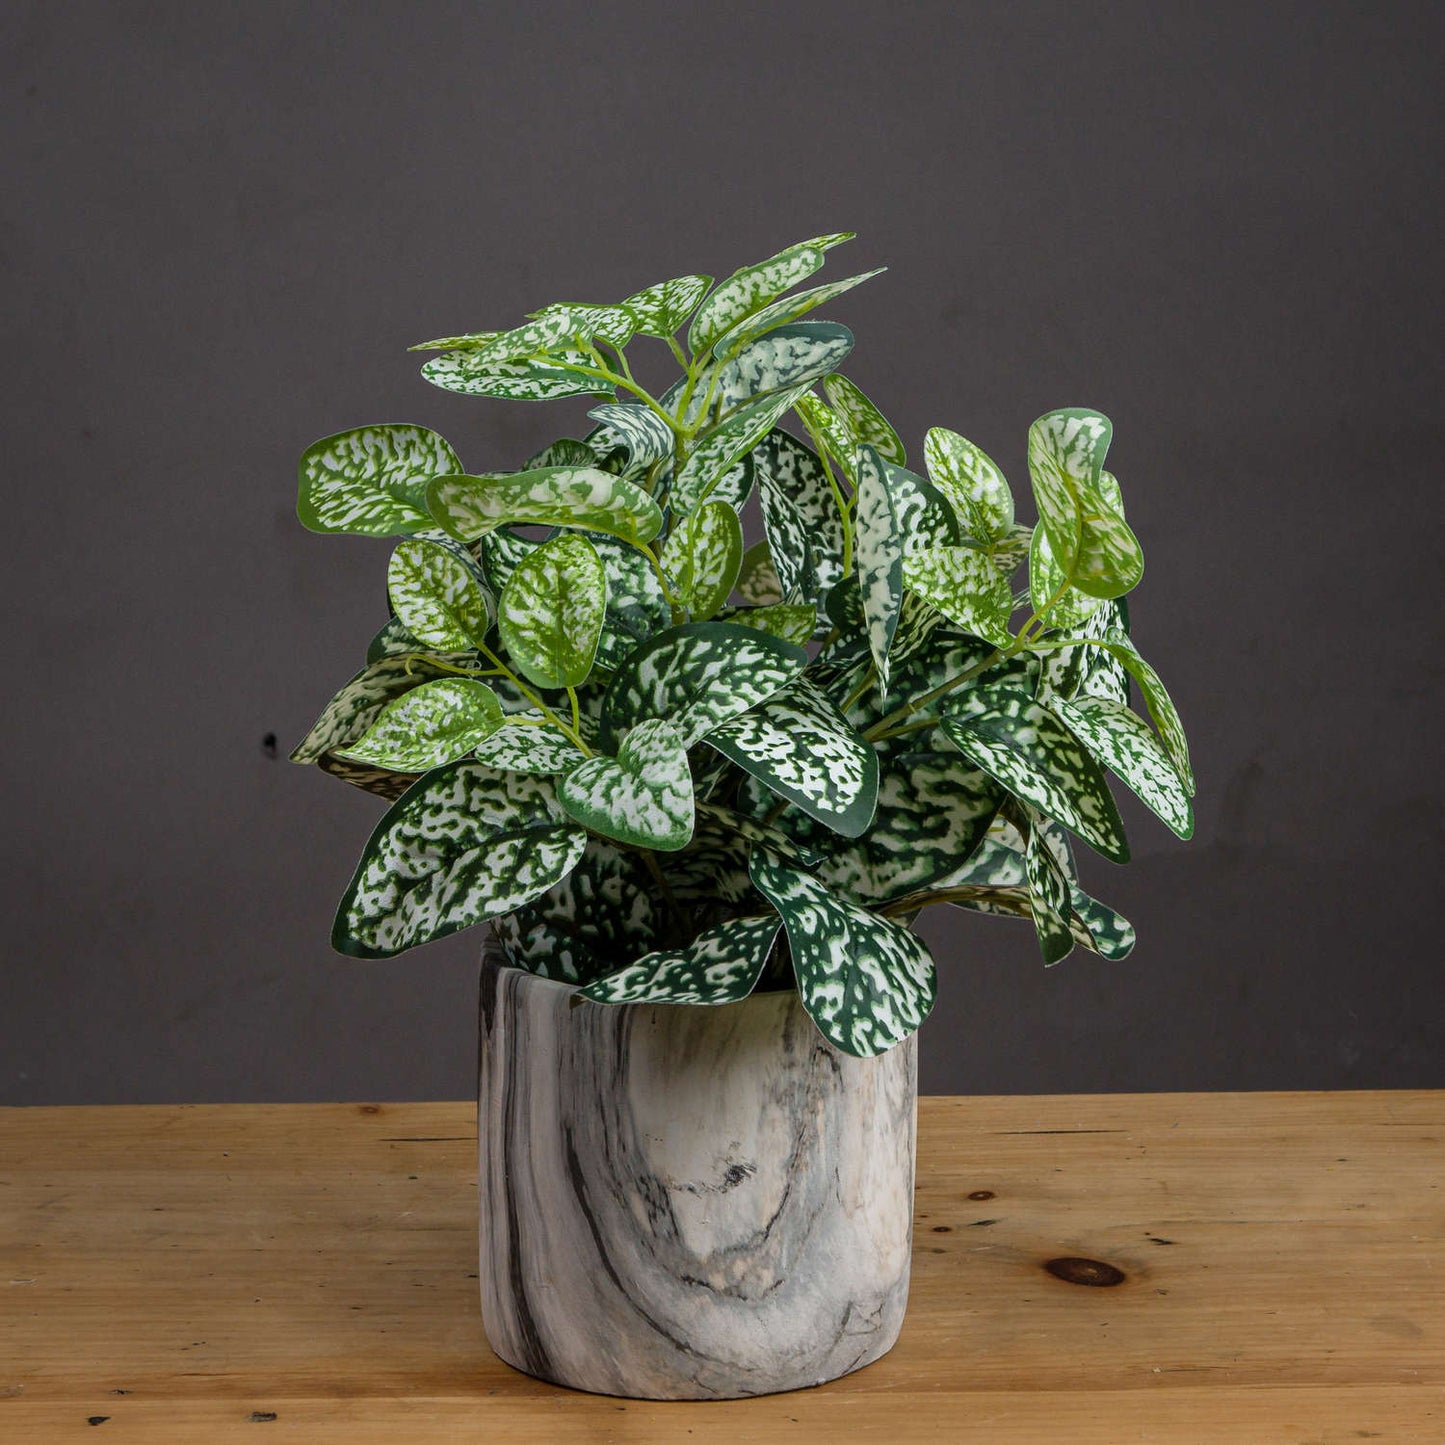 Variegated White And Green Nerve Plant